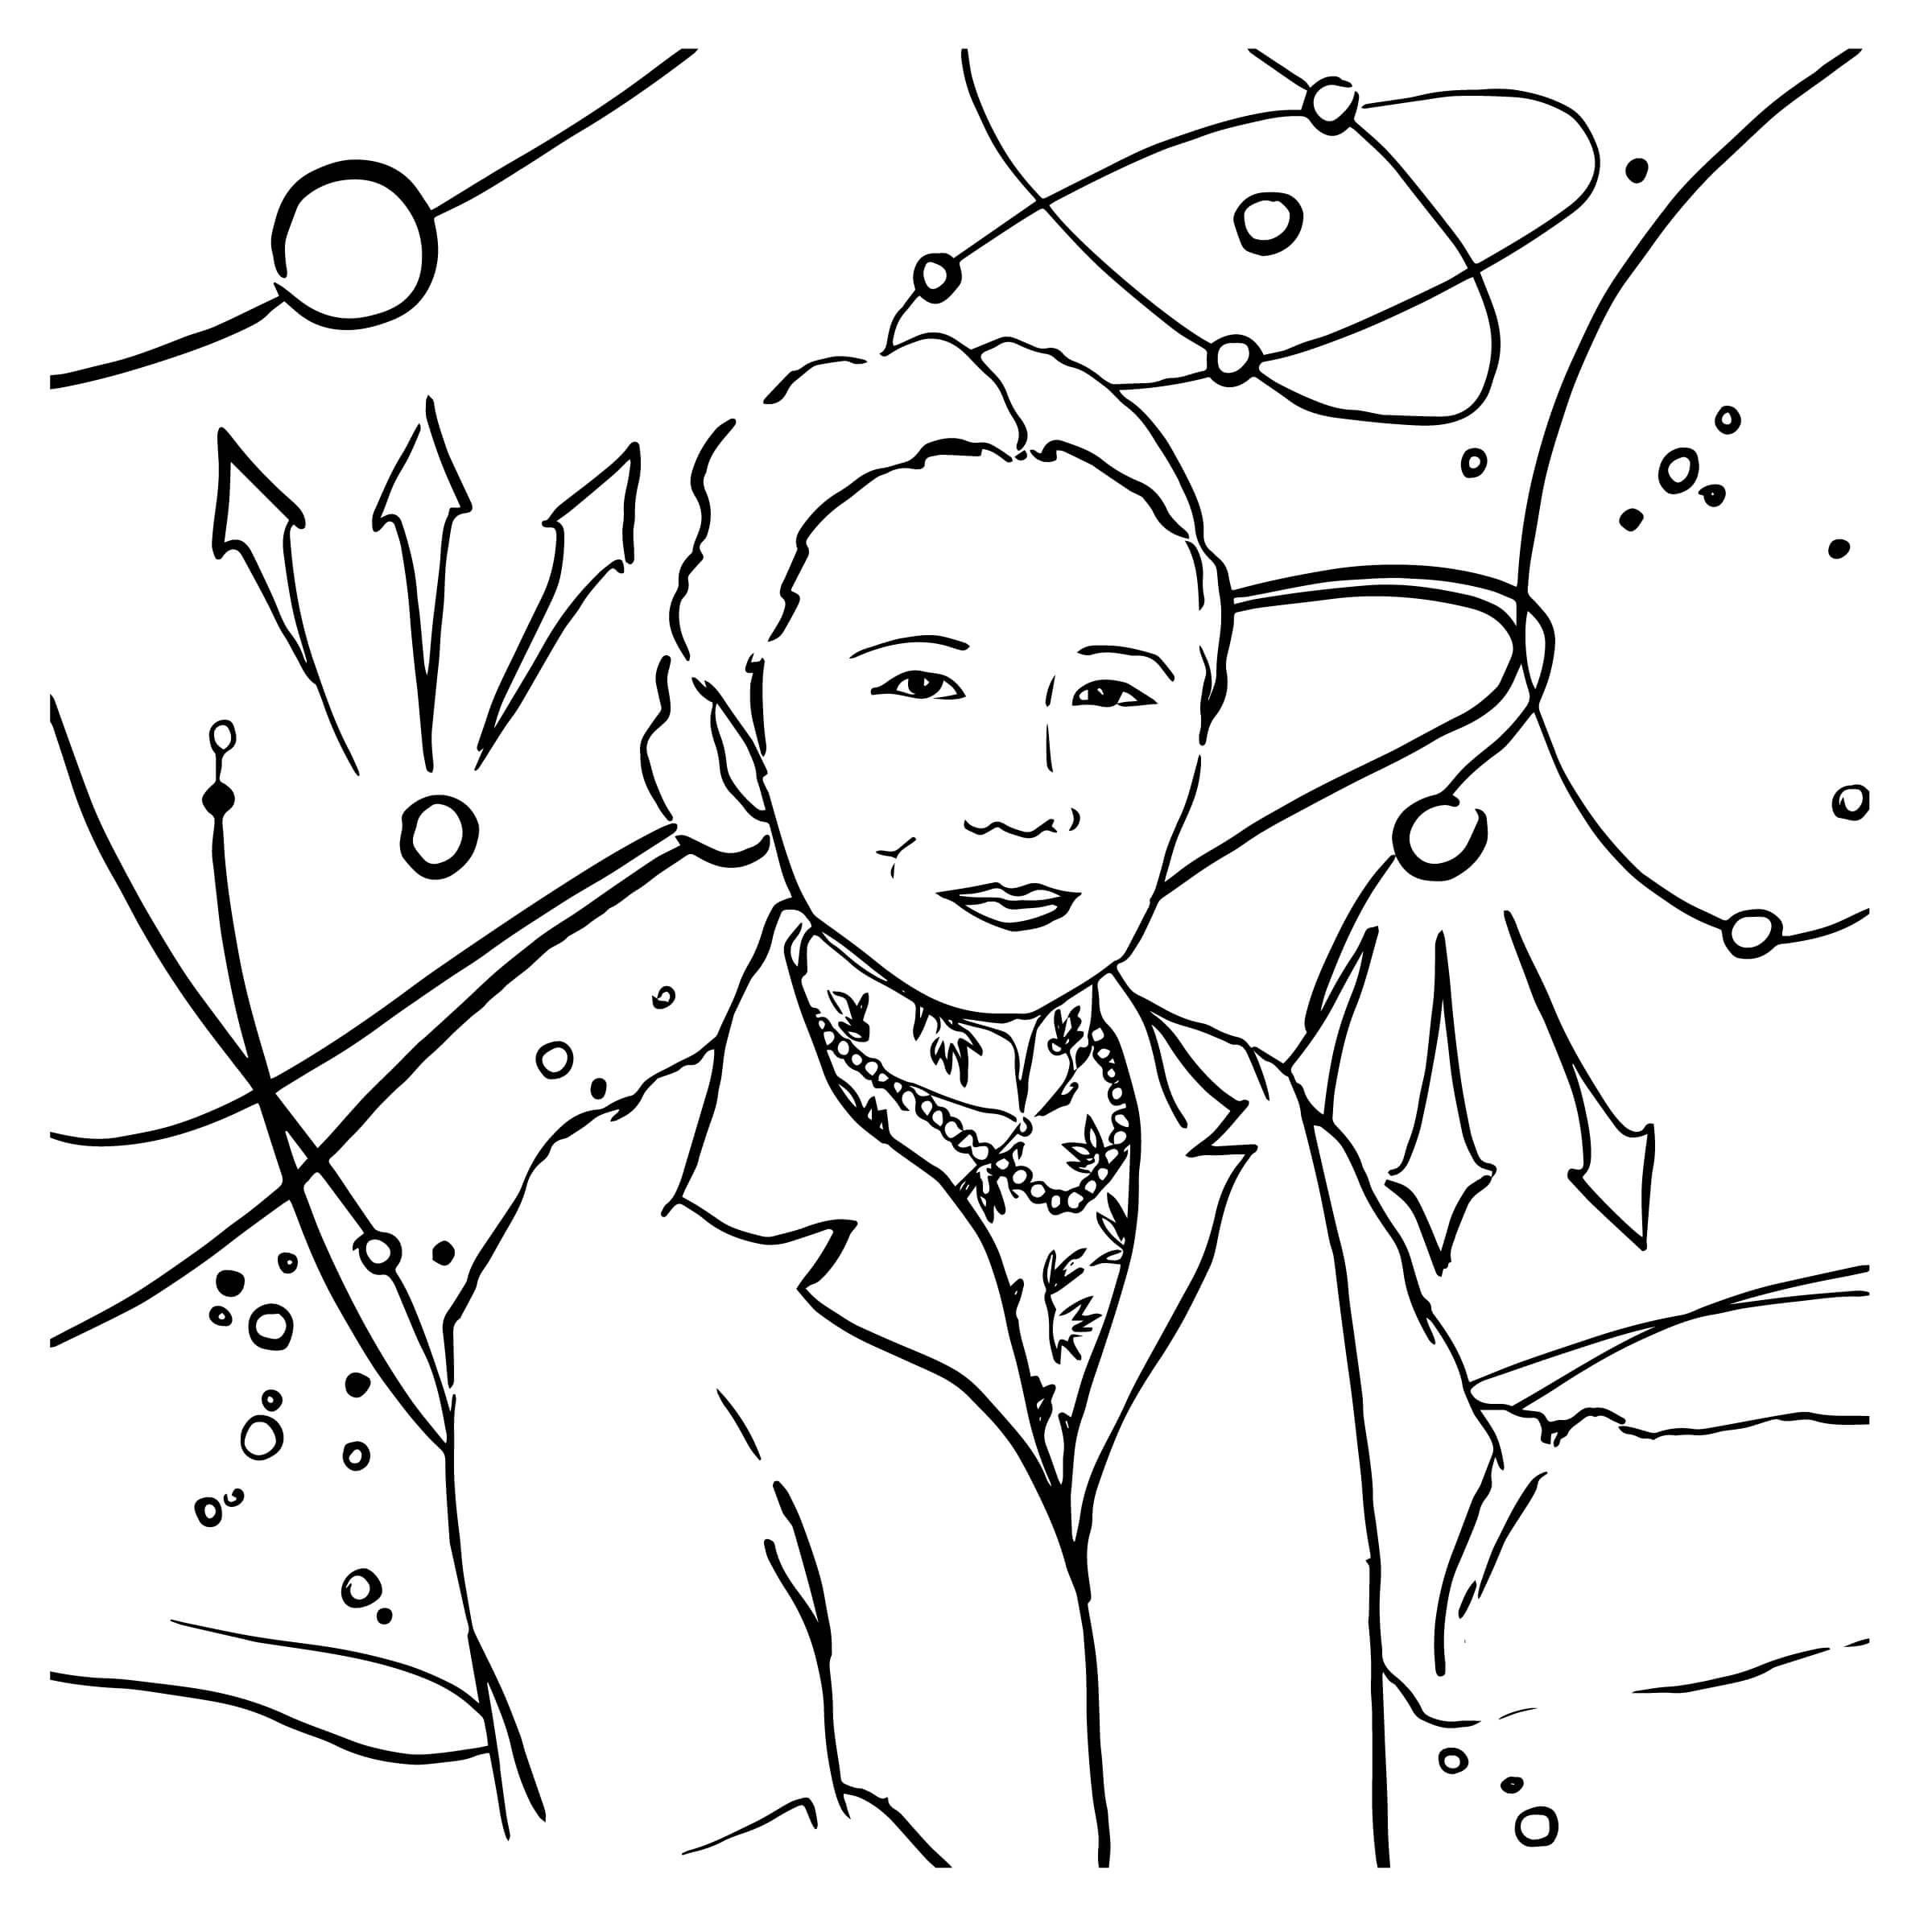  Black and white drawing of Chien-Shiung Wu 